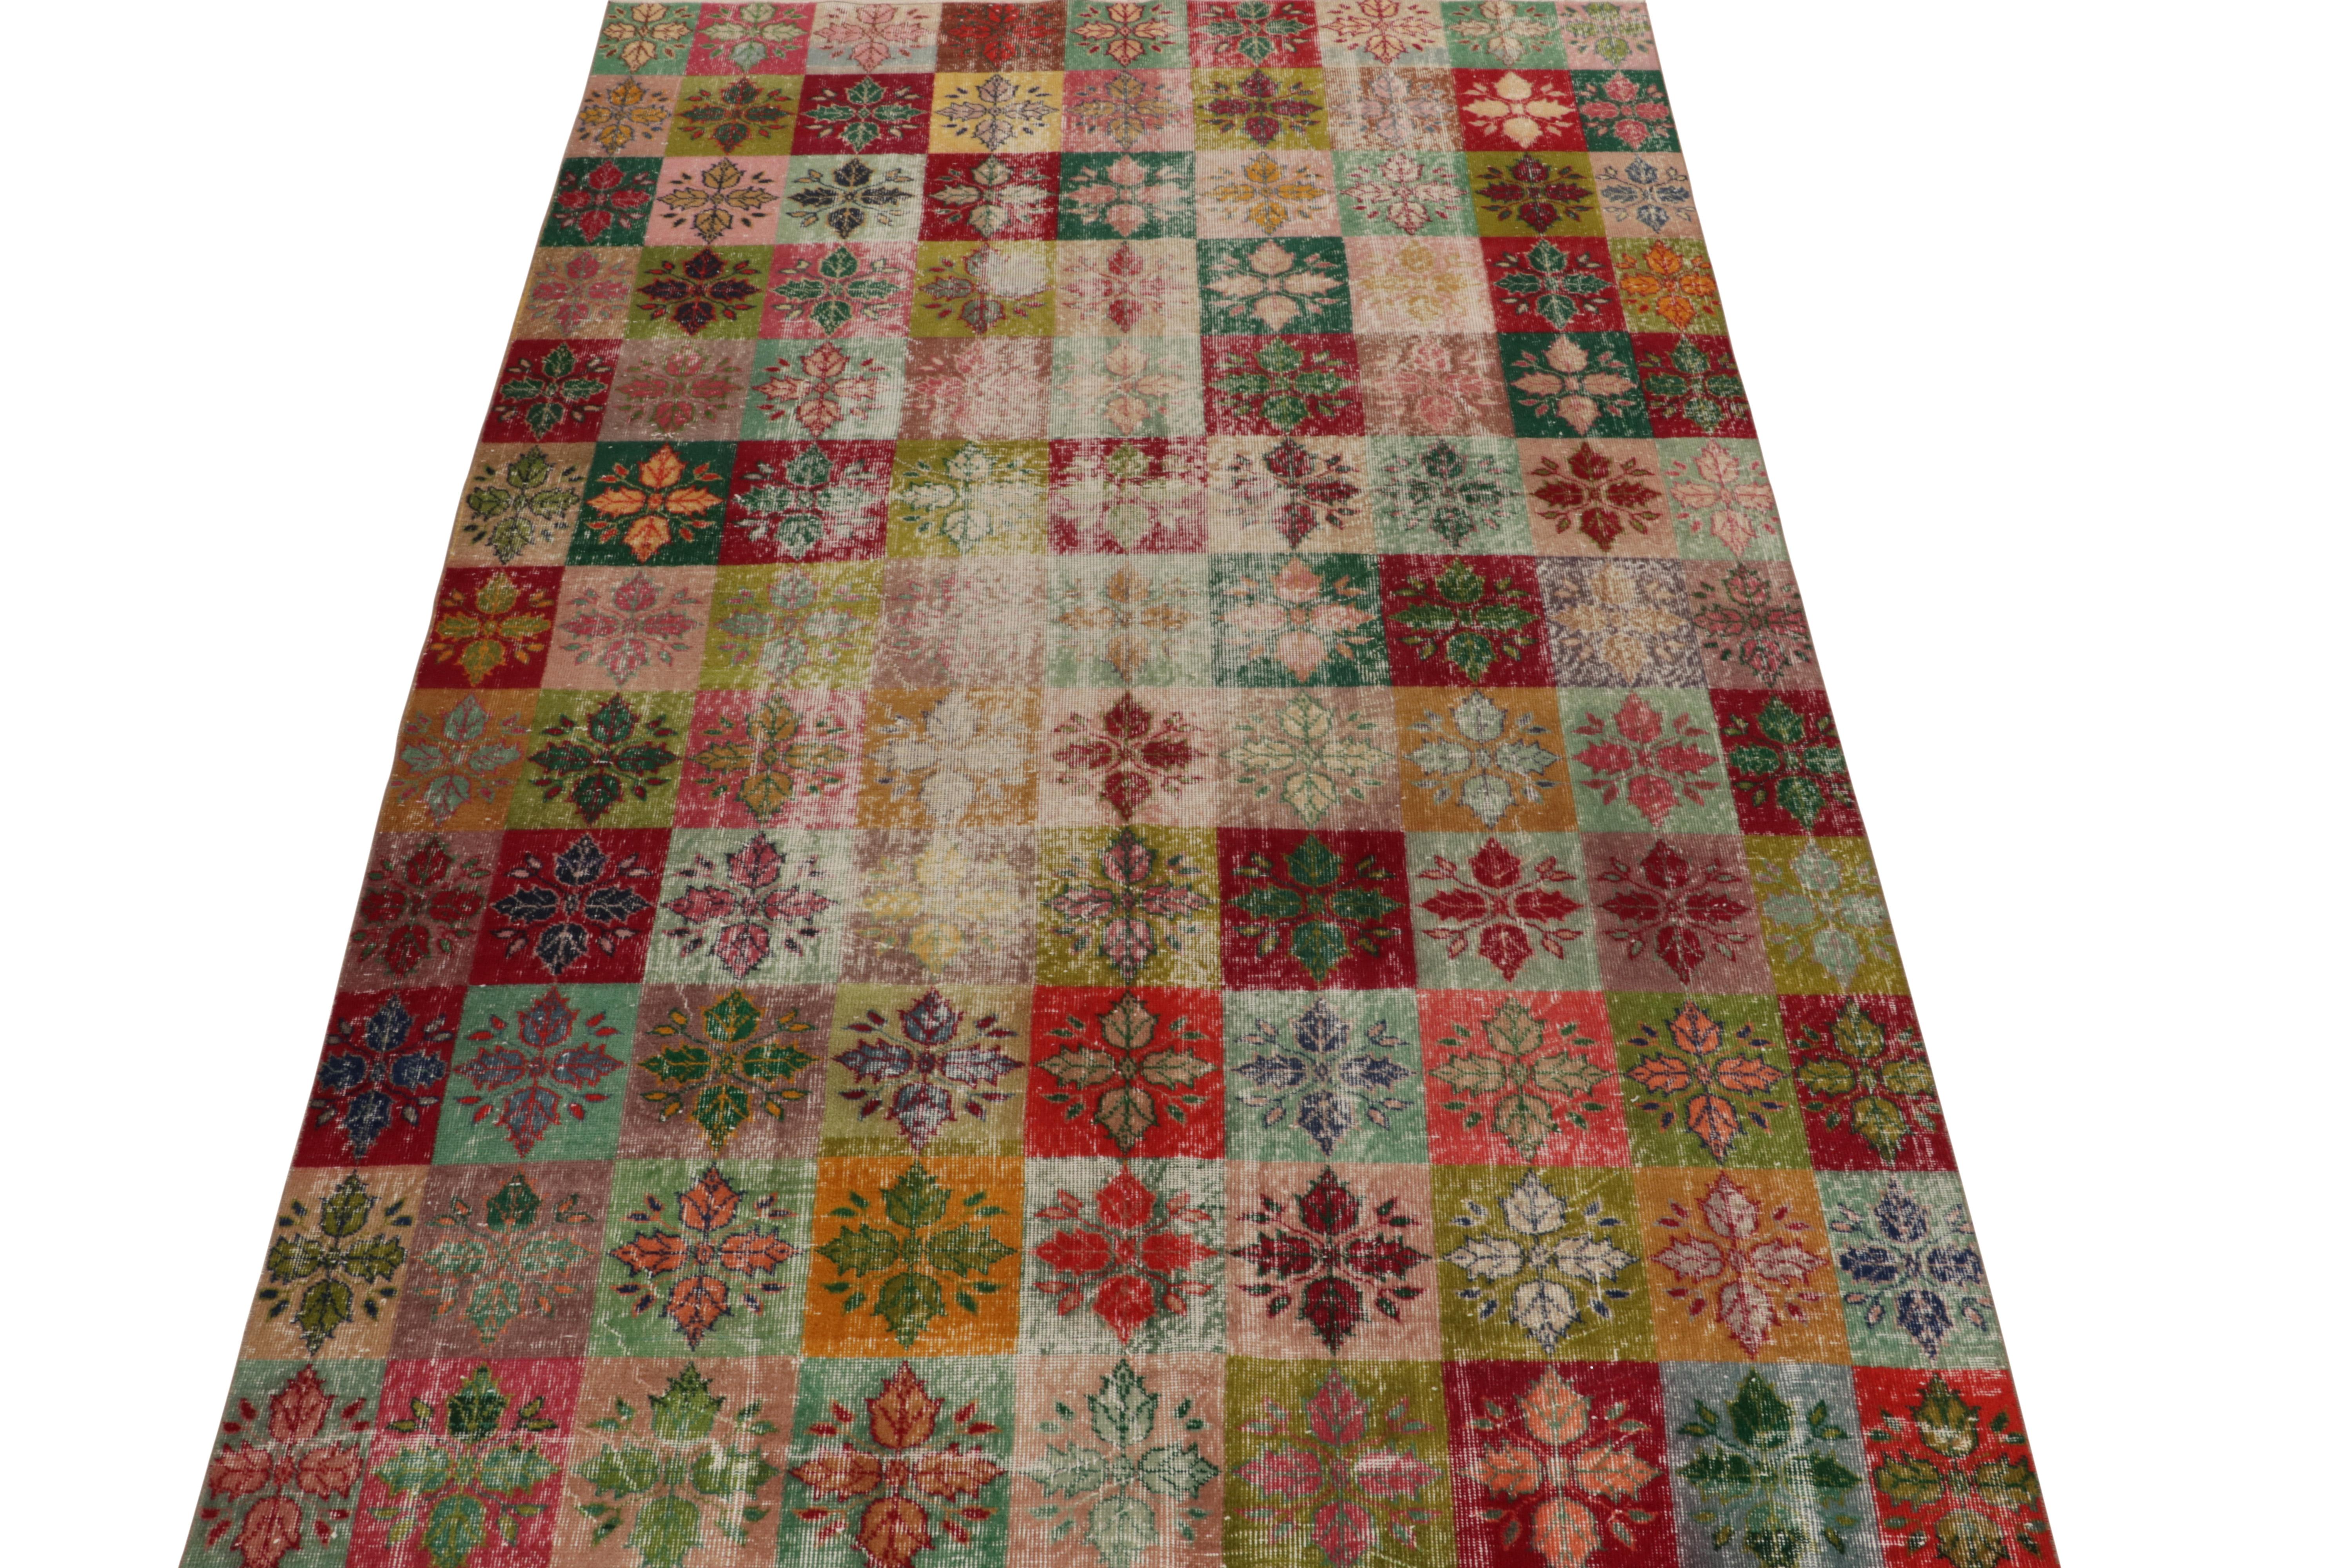 From a venerated Turkish designer, a 6x10 vintage rug of the 1960s—now joining our Mid Century Pasha collection. 

The boho chic design enjoys a graceful multicolor geometric pattern of checkers with floral motifs, enjoying a brilliant movement in